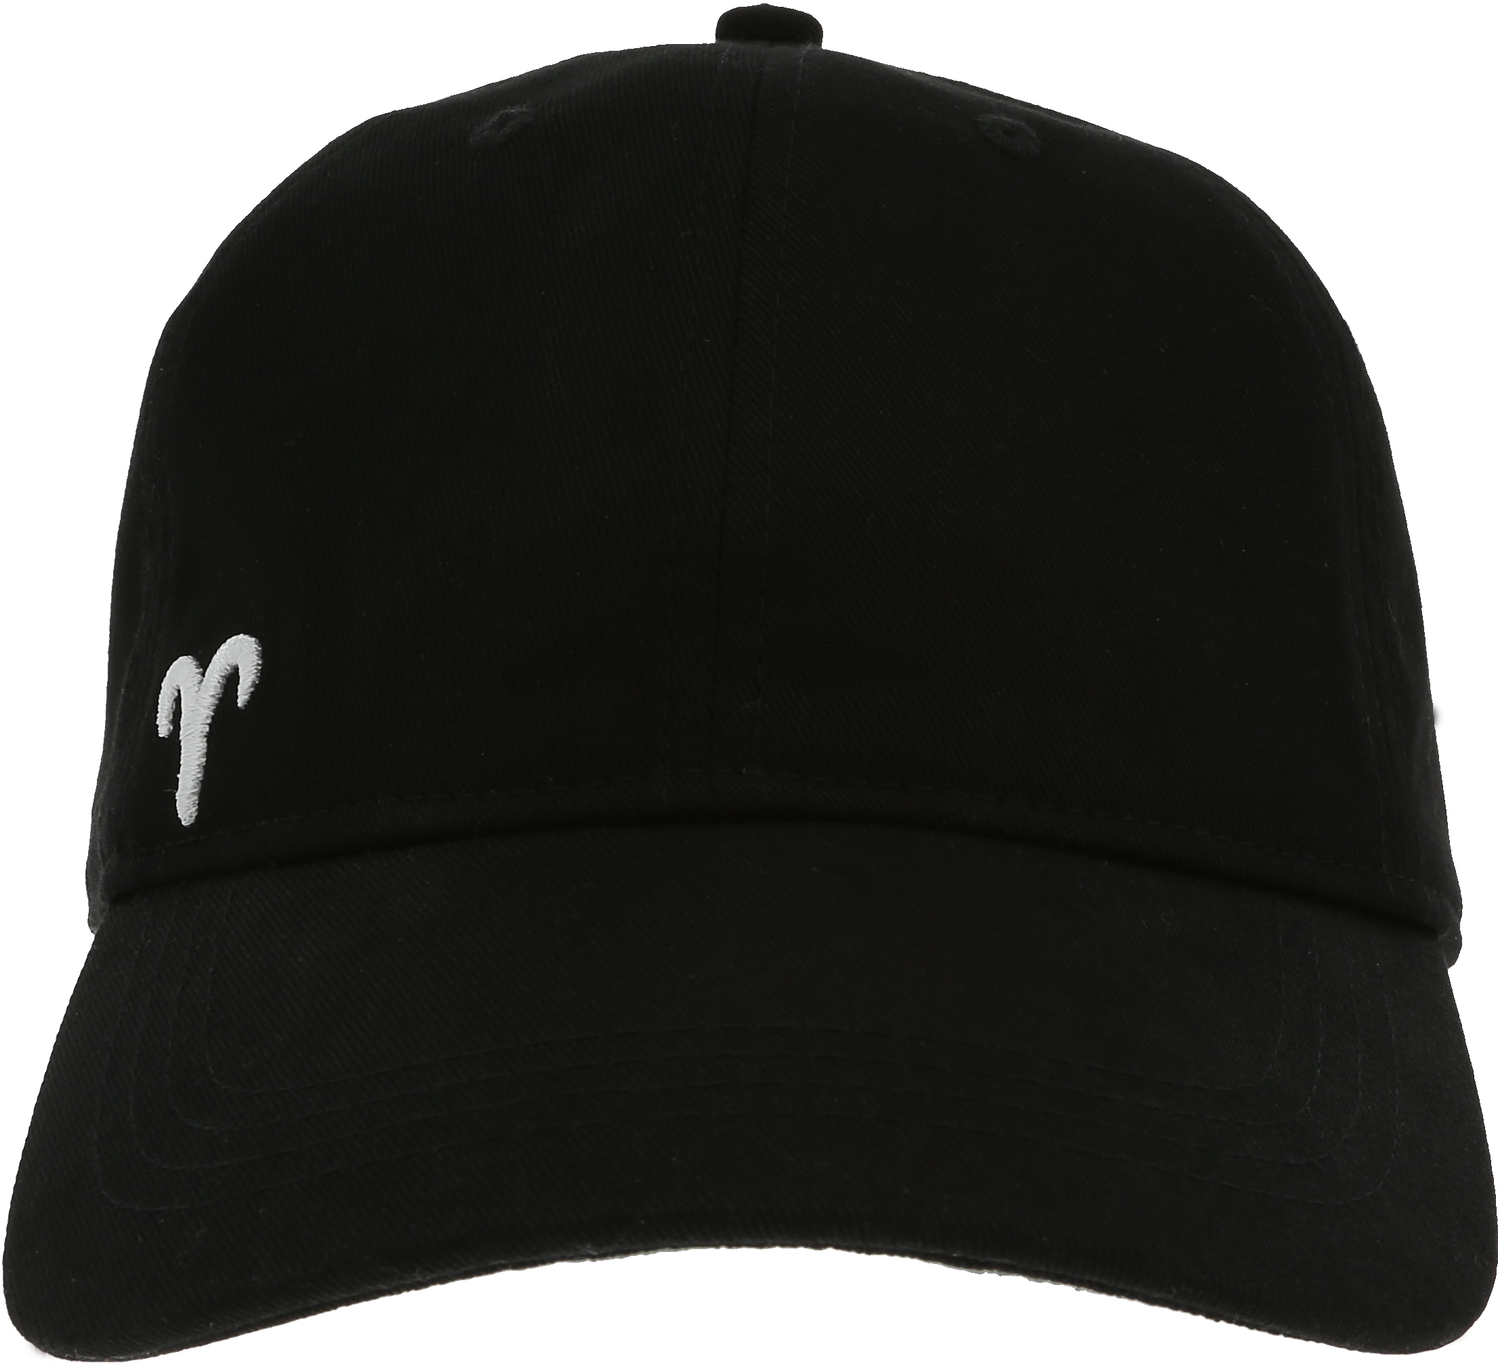 Aries by You Are a Gem - Aries - Black Adjustable Hat